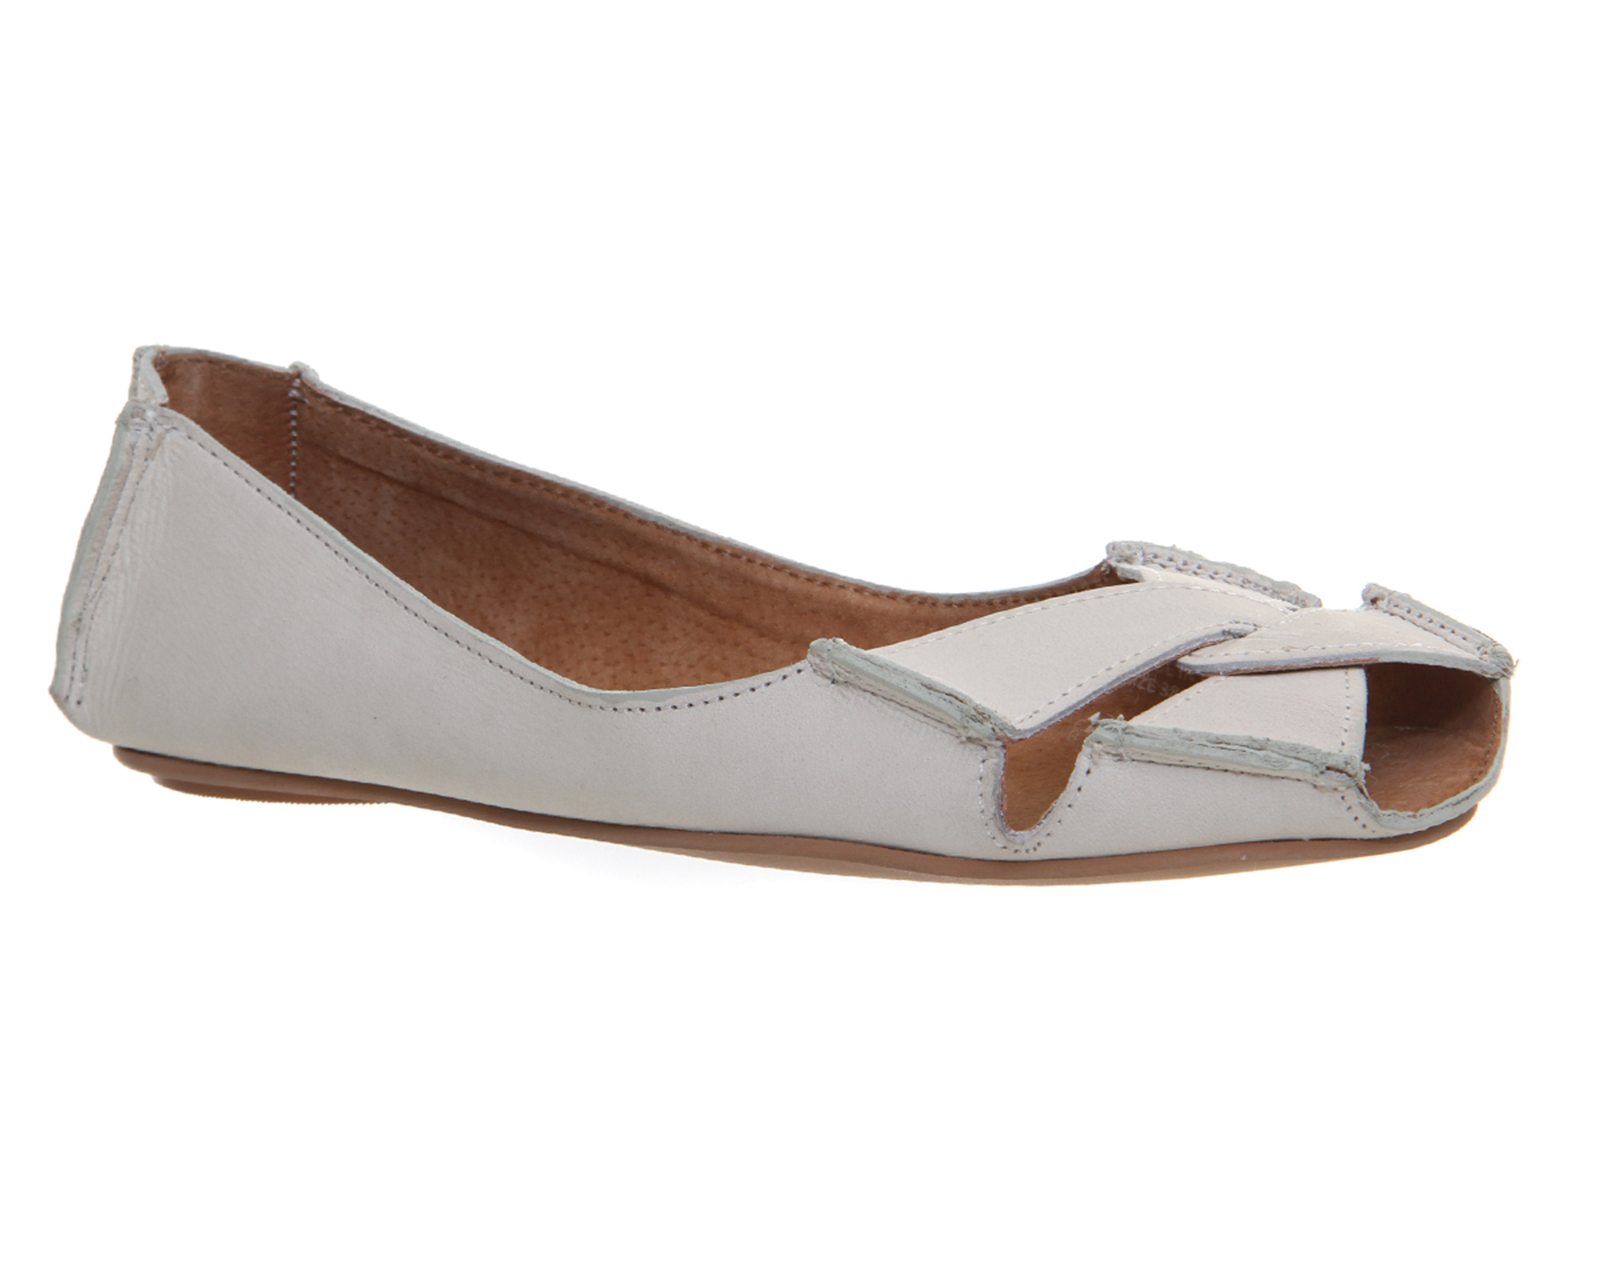 OFFICELuxe Softy Peep ShoeWhite Leather